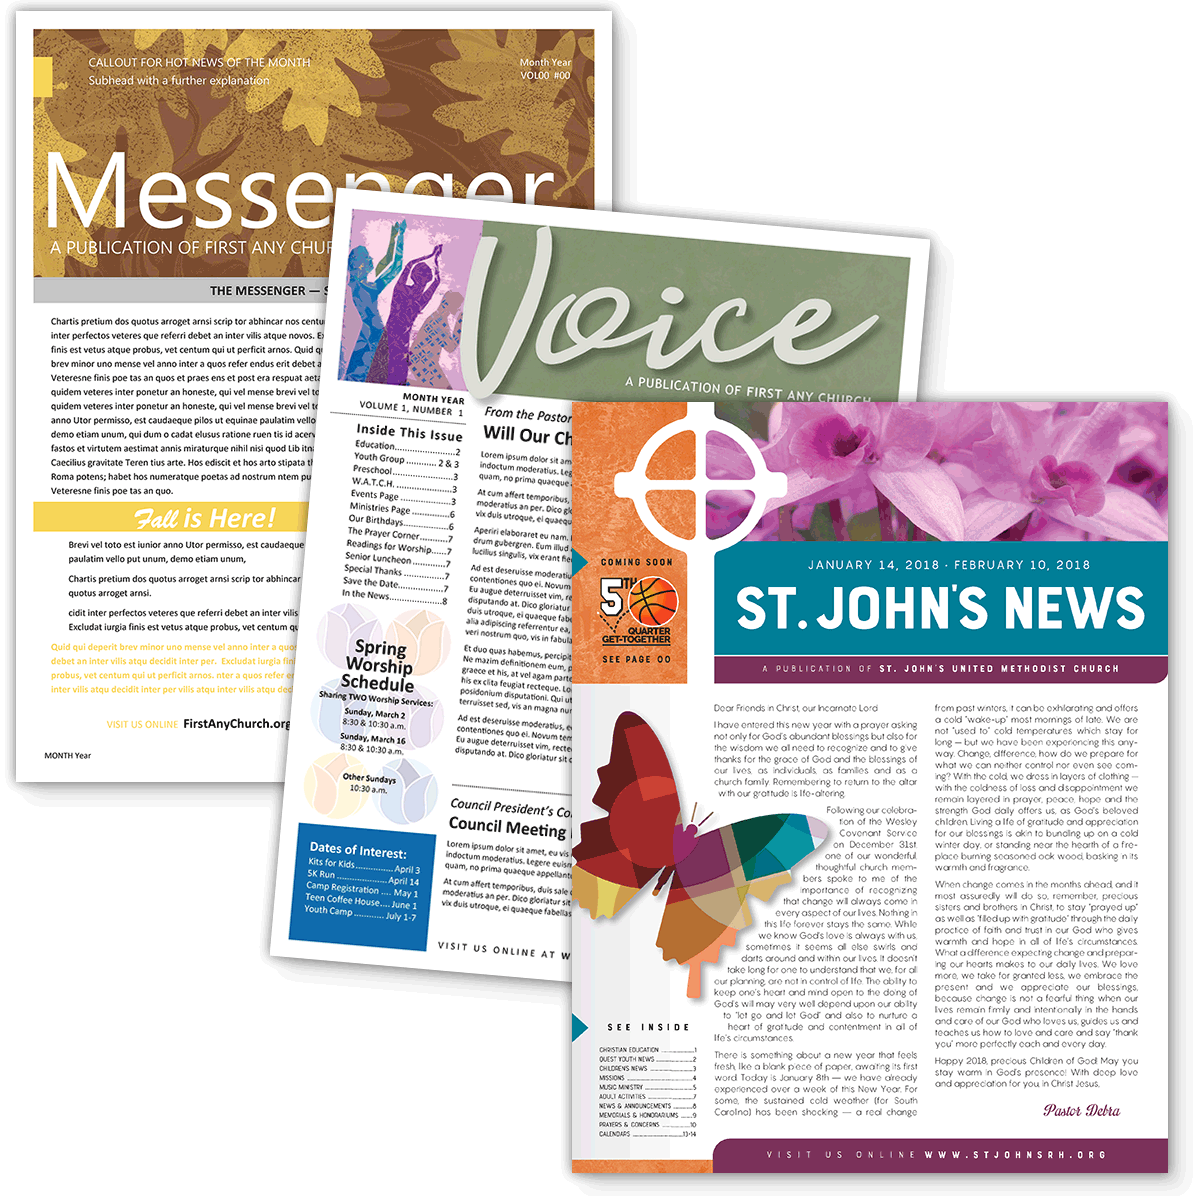 Church newsletter art, content and media resources